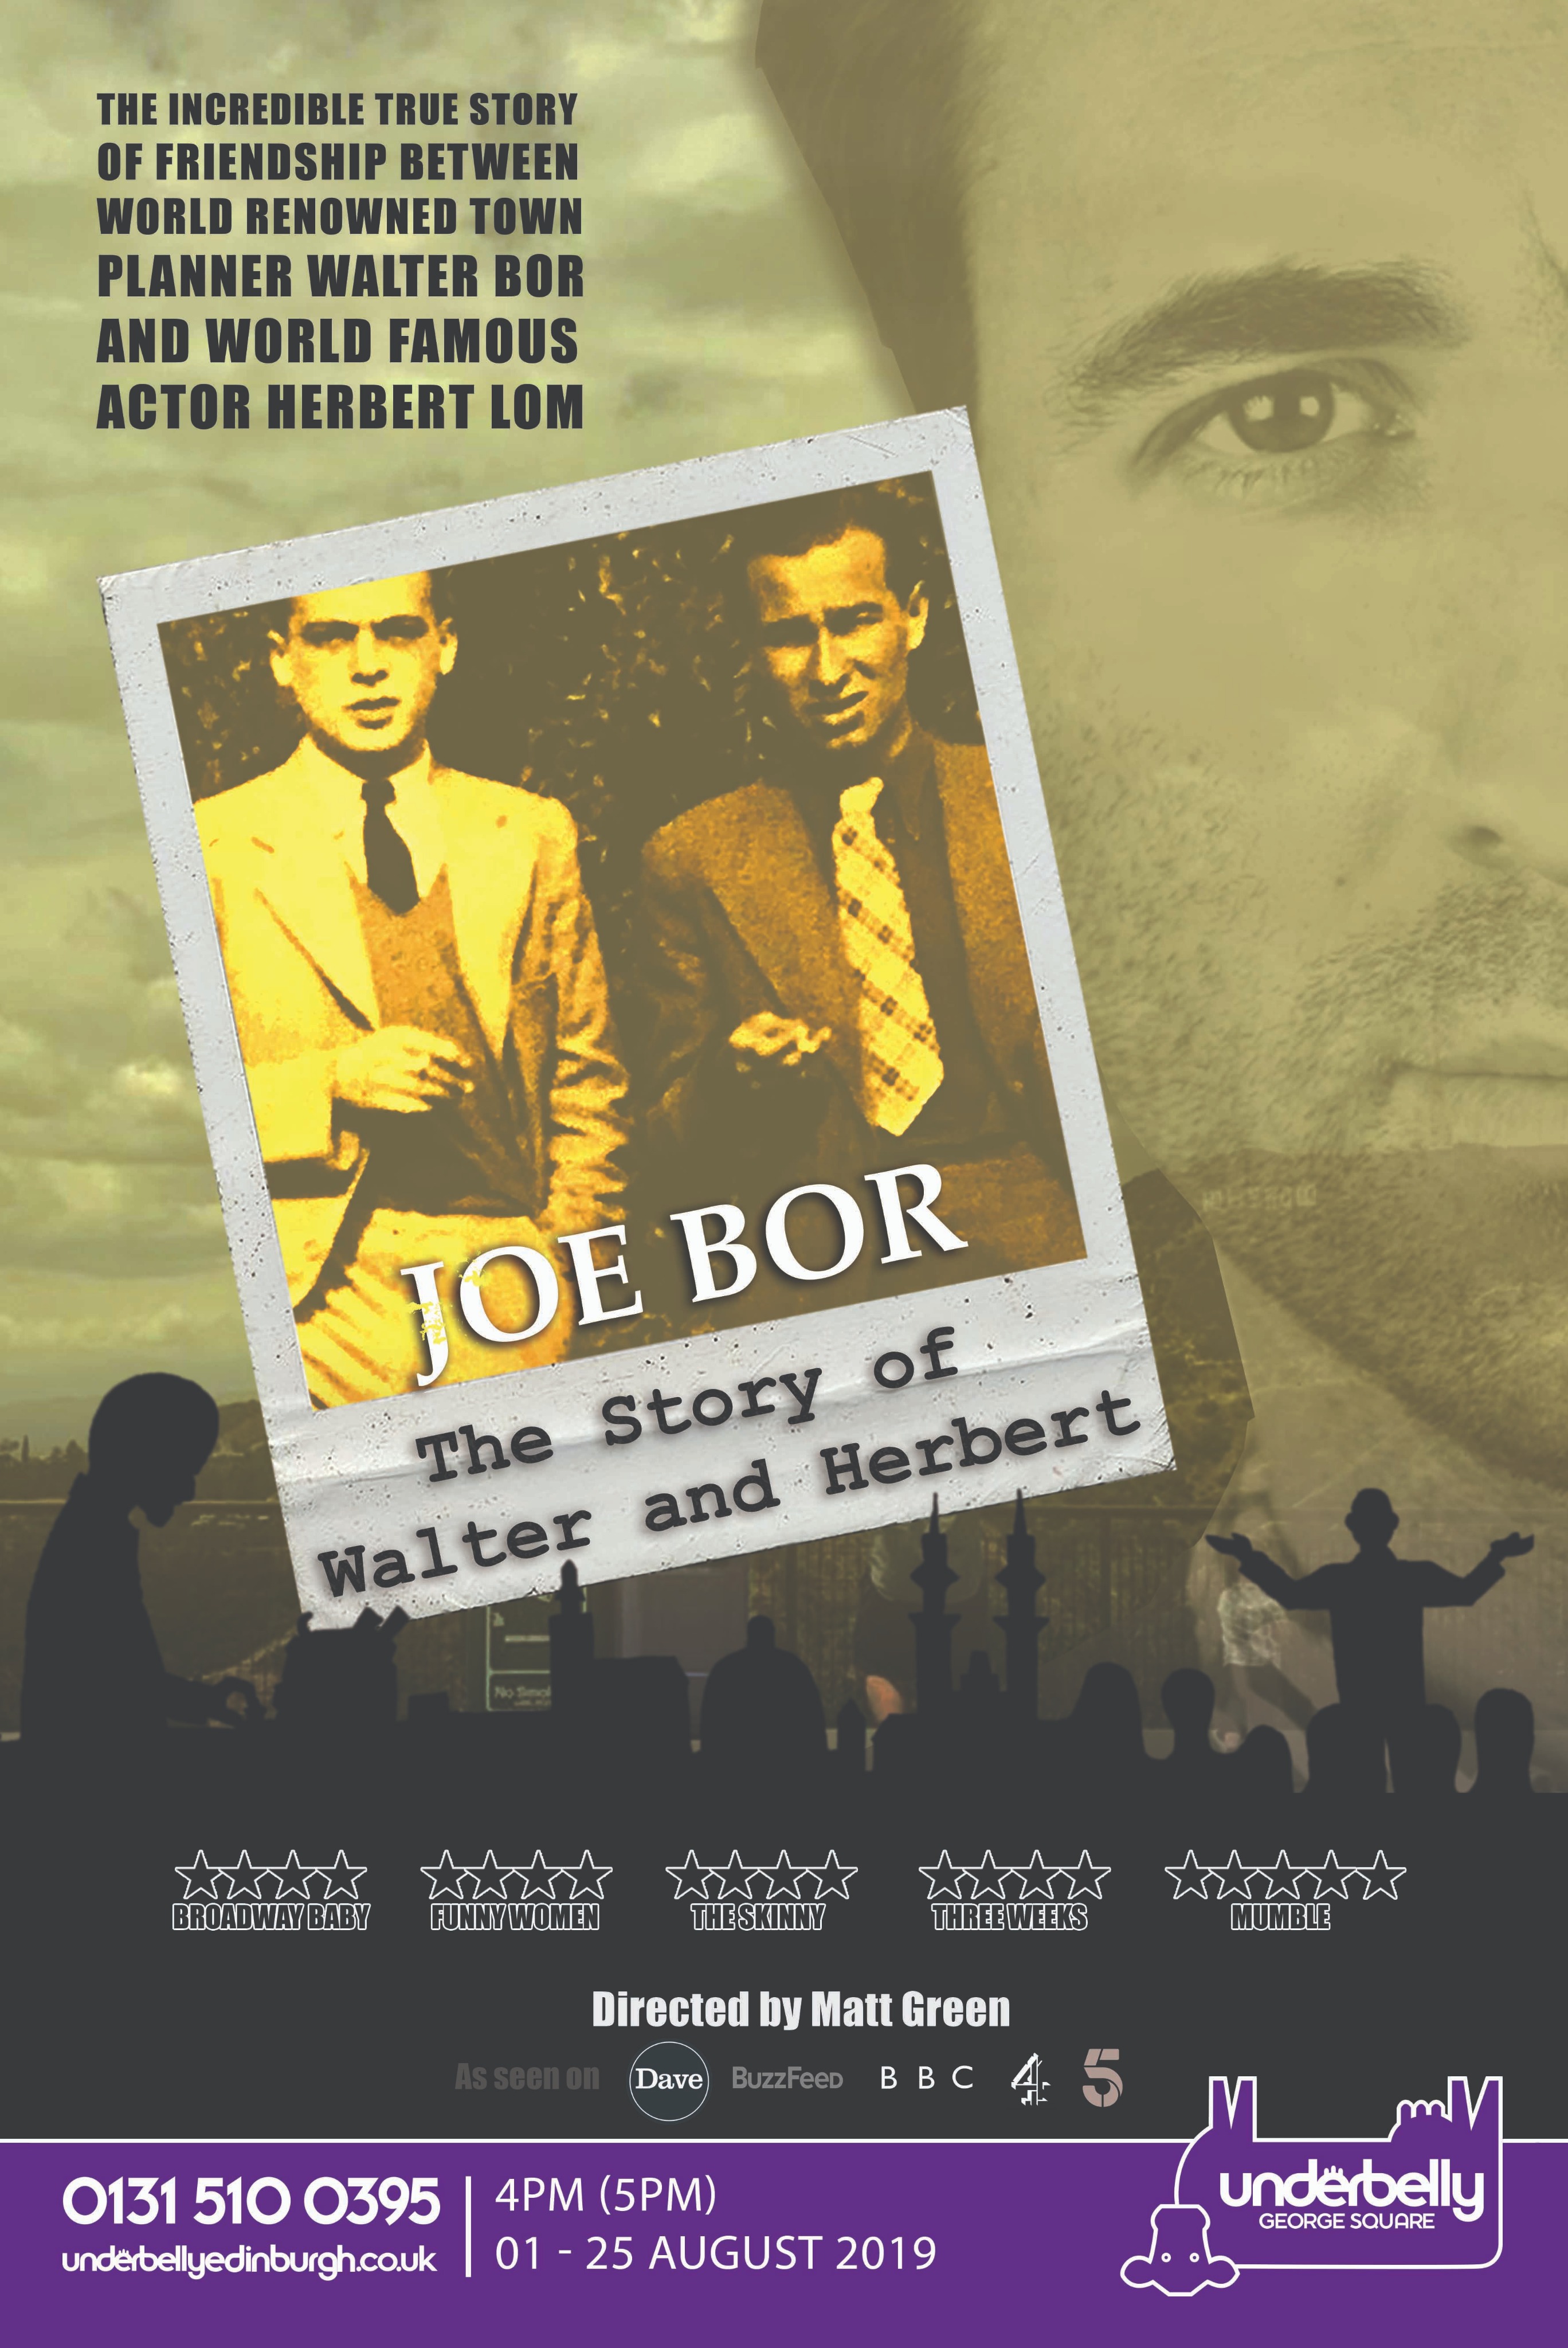 The poster for Joe Bor: The Story of Walter and Herbert